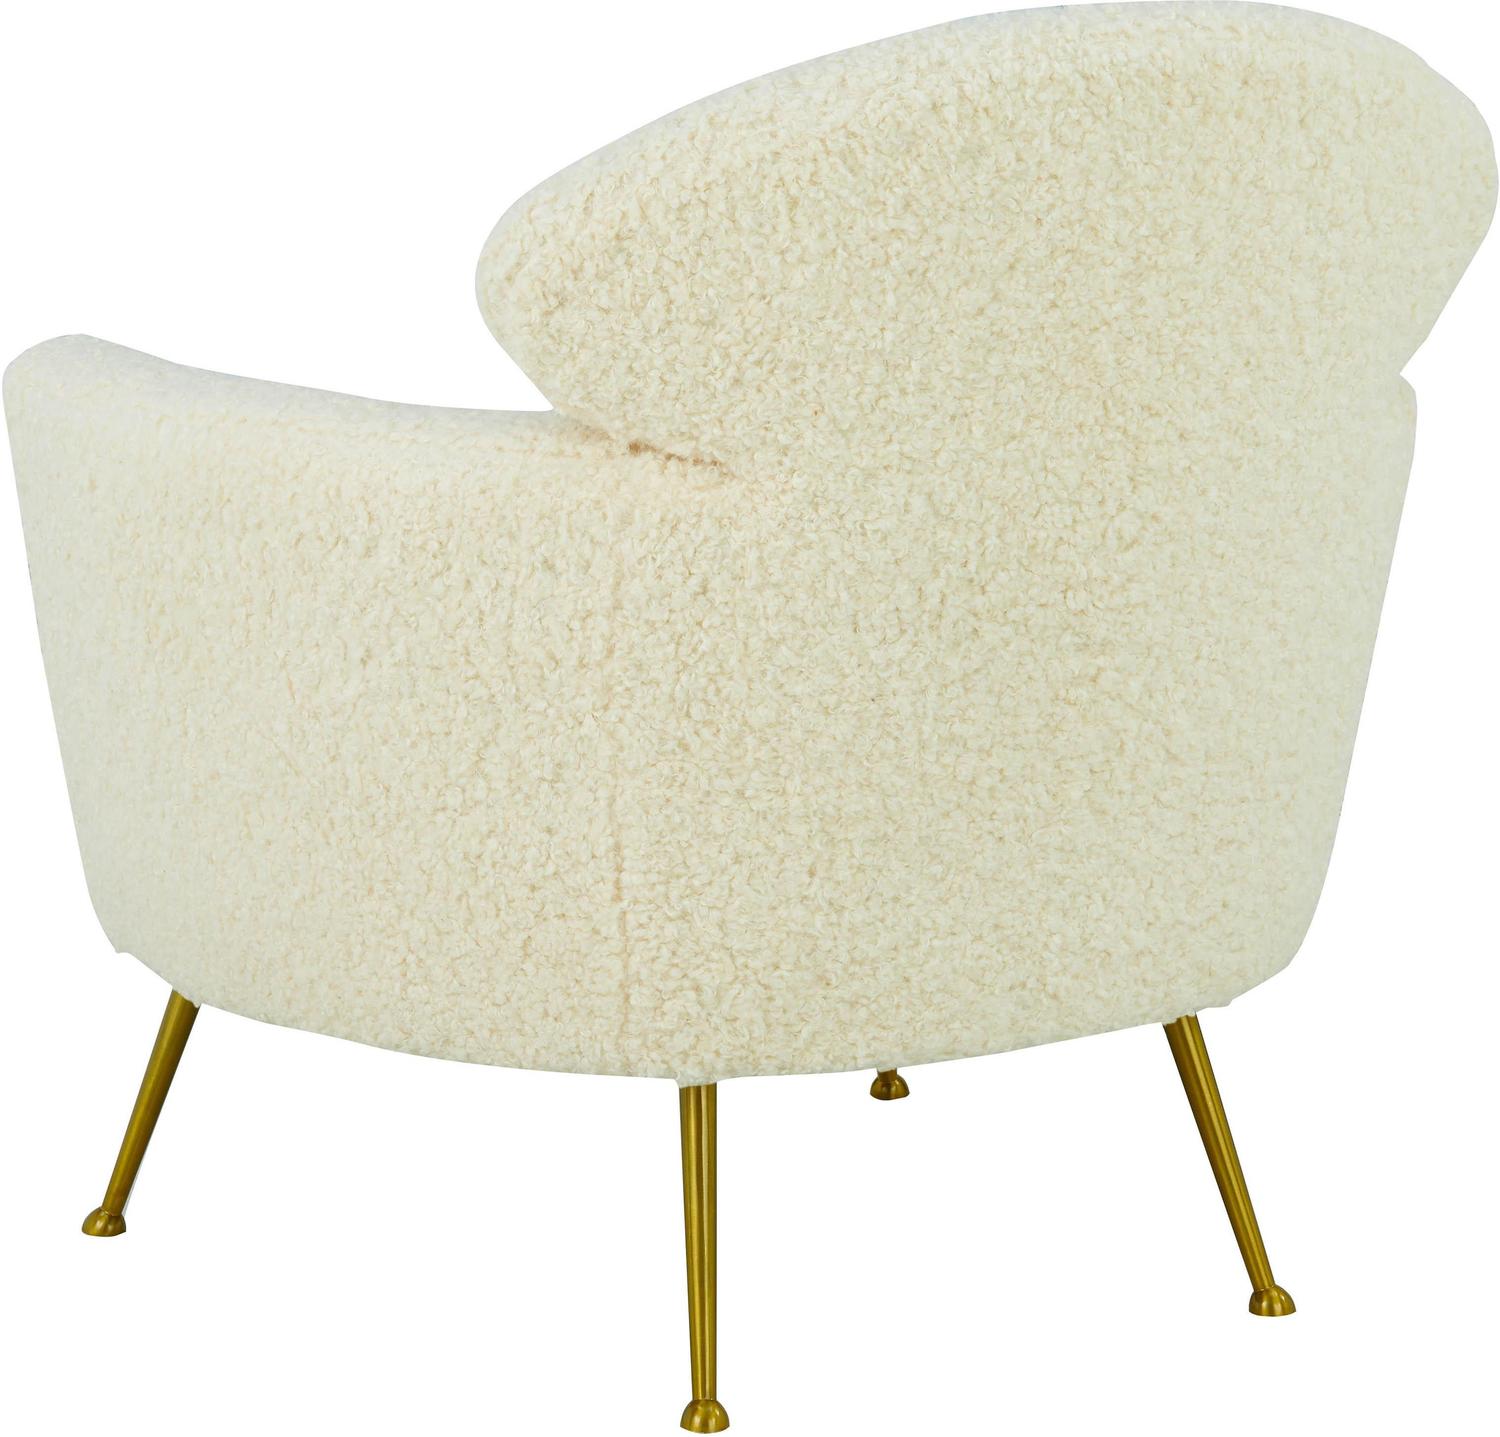 chair living Tov Furniture Accent Chairs Cream